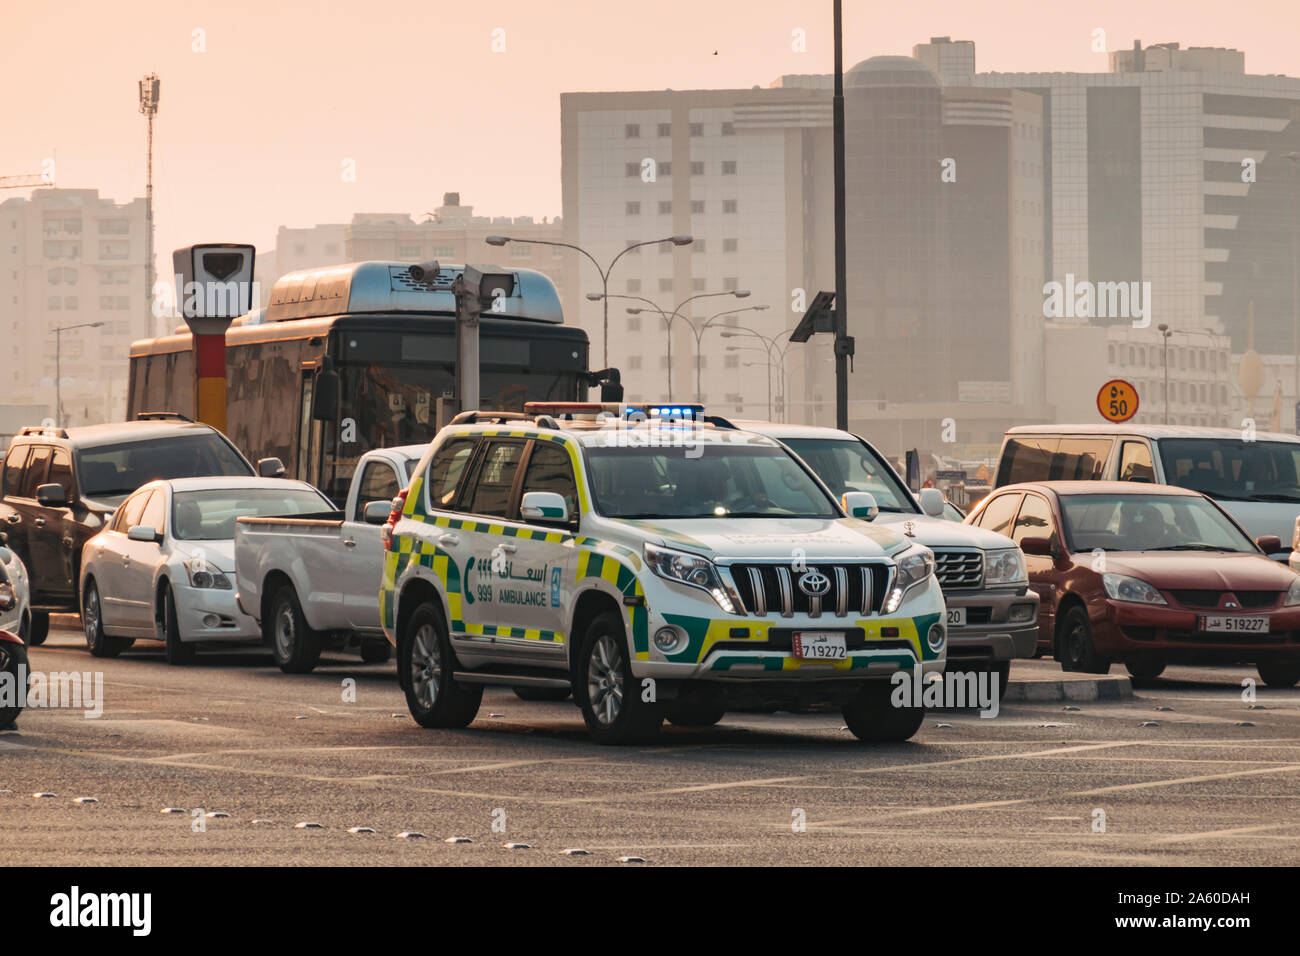 An advanced paramedic in an Toyota Prada SUV ambulance uses the siren cutting traffic at an intersection, en route to an emergency in Doha, Qatar Stock Photo